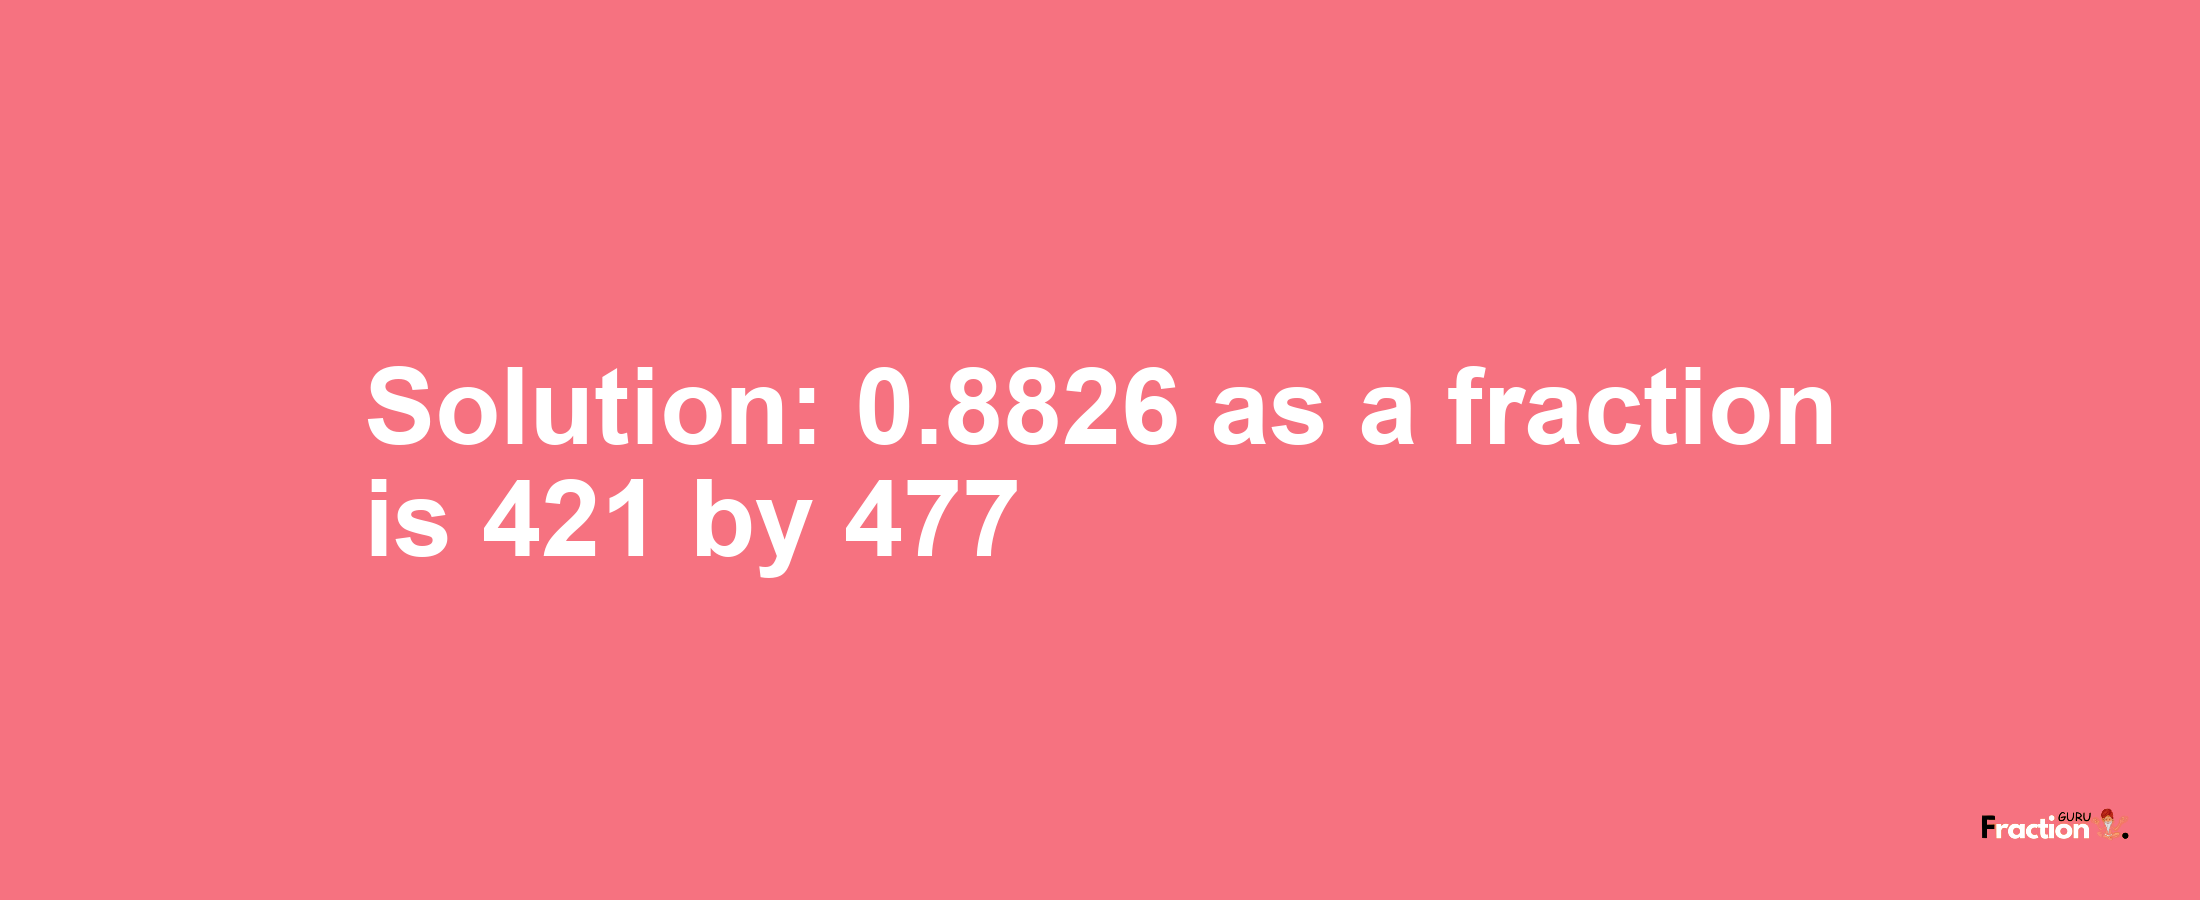 Solution:0.8826 as a fraction is 421/477